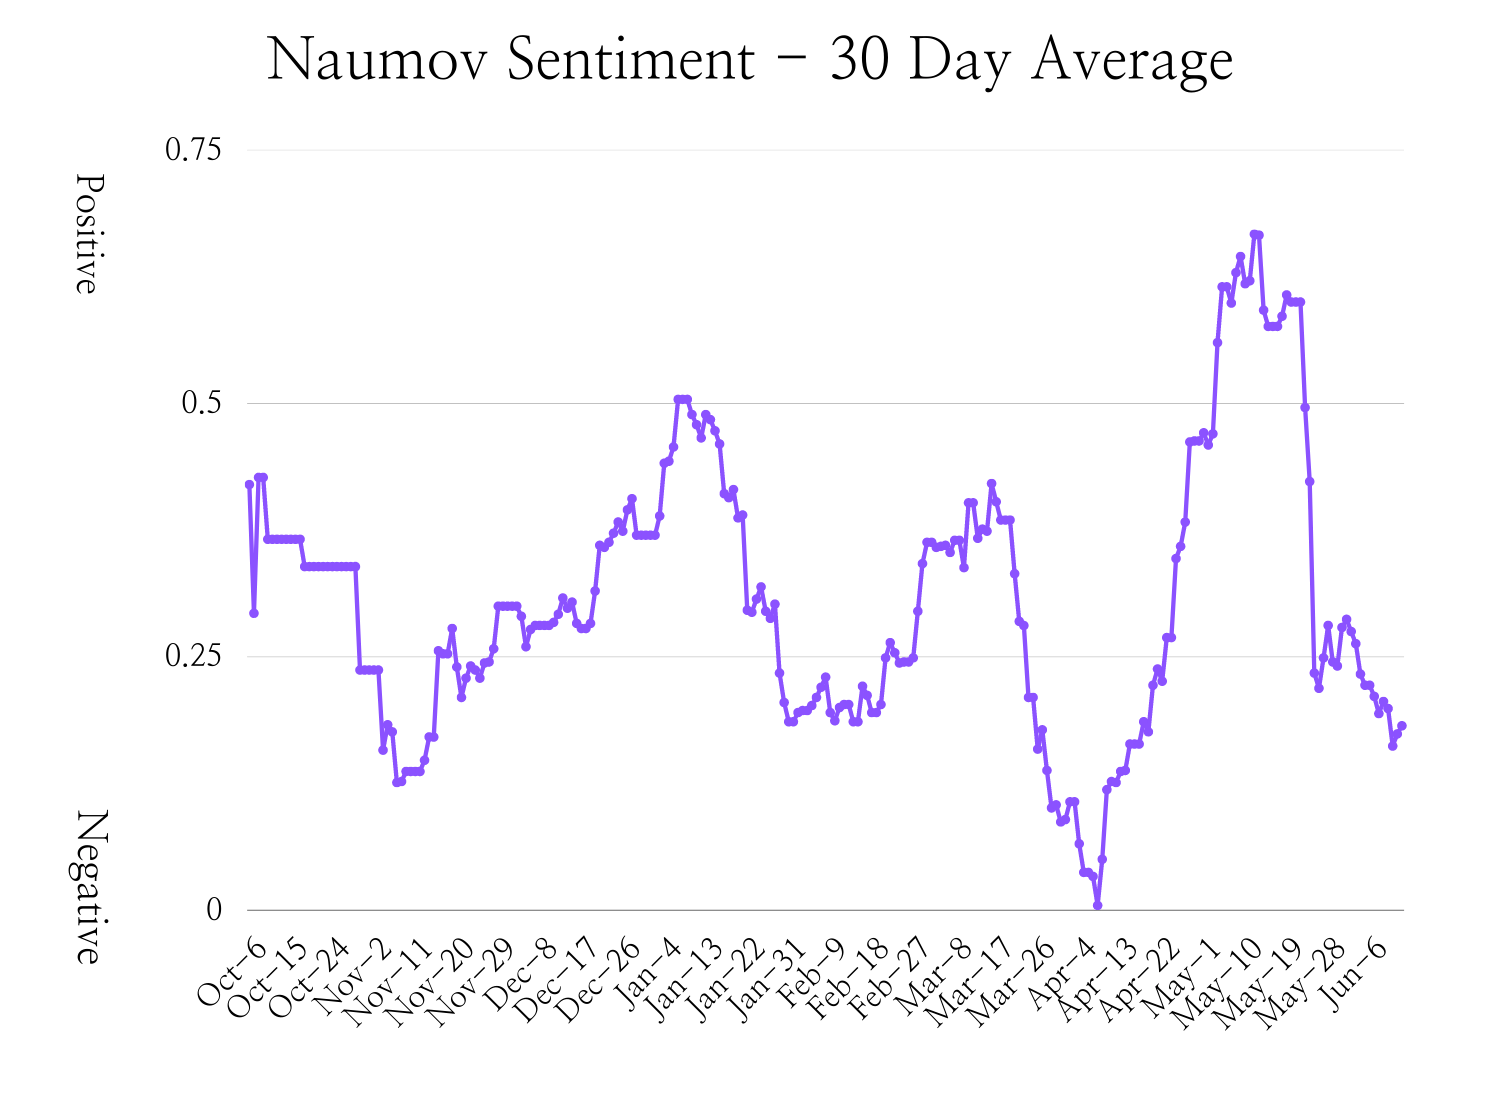 Line showing sentiment scores sliding up and down from October to June. There are four peaks and four troughs. An especially low trough occurs in April, followed by a very high peak in May and a later sharp drop off.